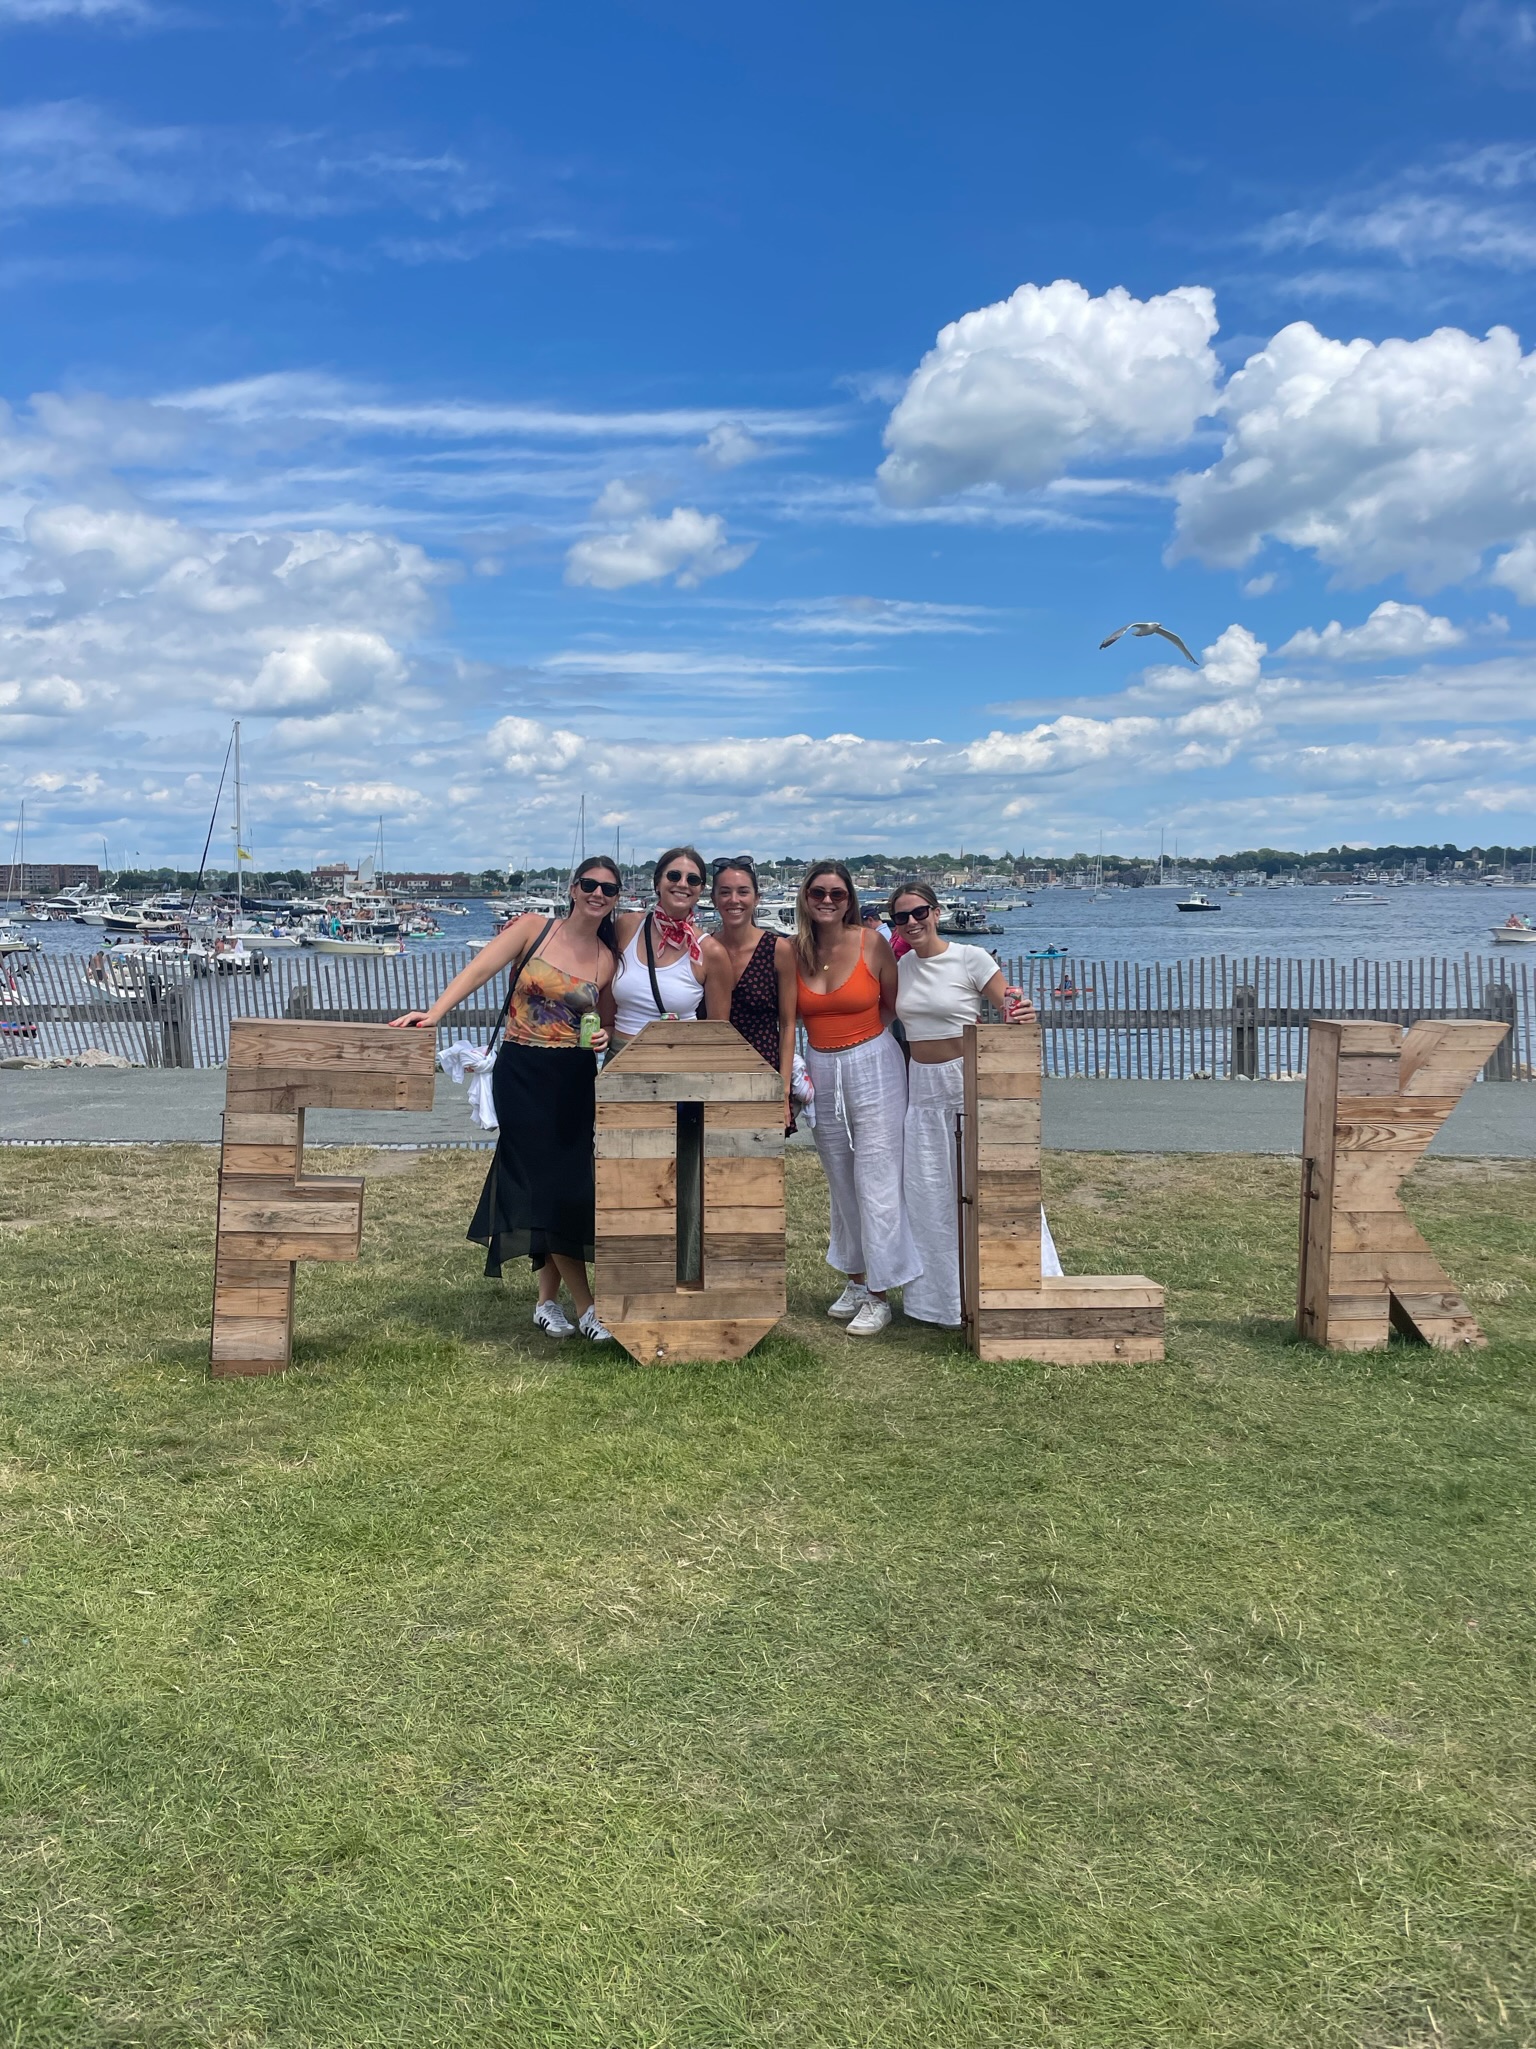 A group of five people stands together outdoors, smiling at the camera, with their arms around one another. They are posing next to large wooden letters spelling "FOLK." The background features a scenic view of water, boats, and a partly cloudy sky.